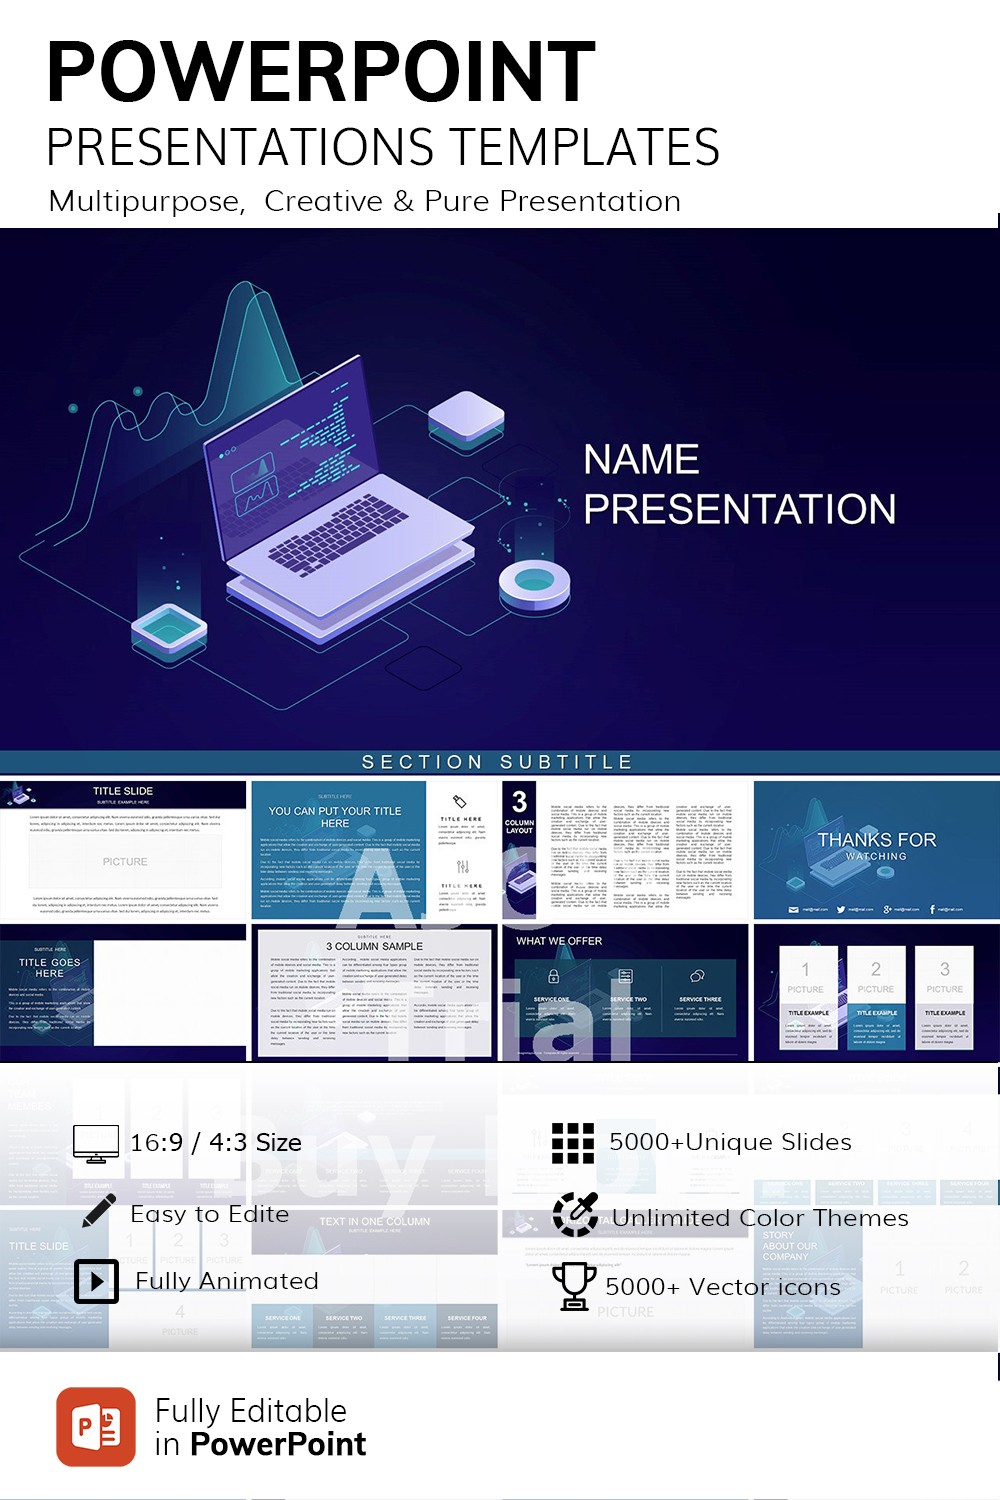 Software powerpoint presentation templates free download ccleaner crack free download